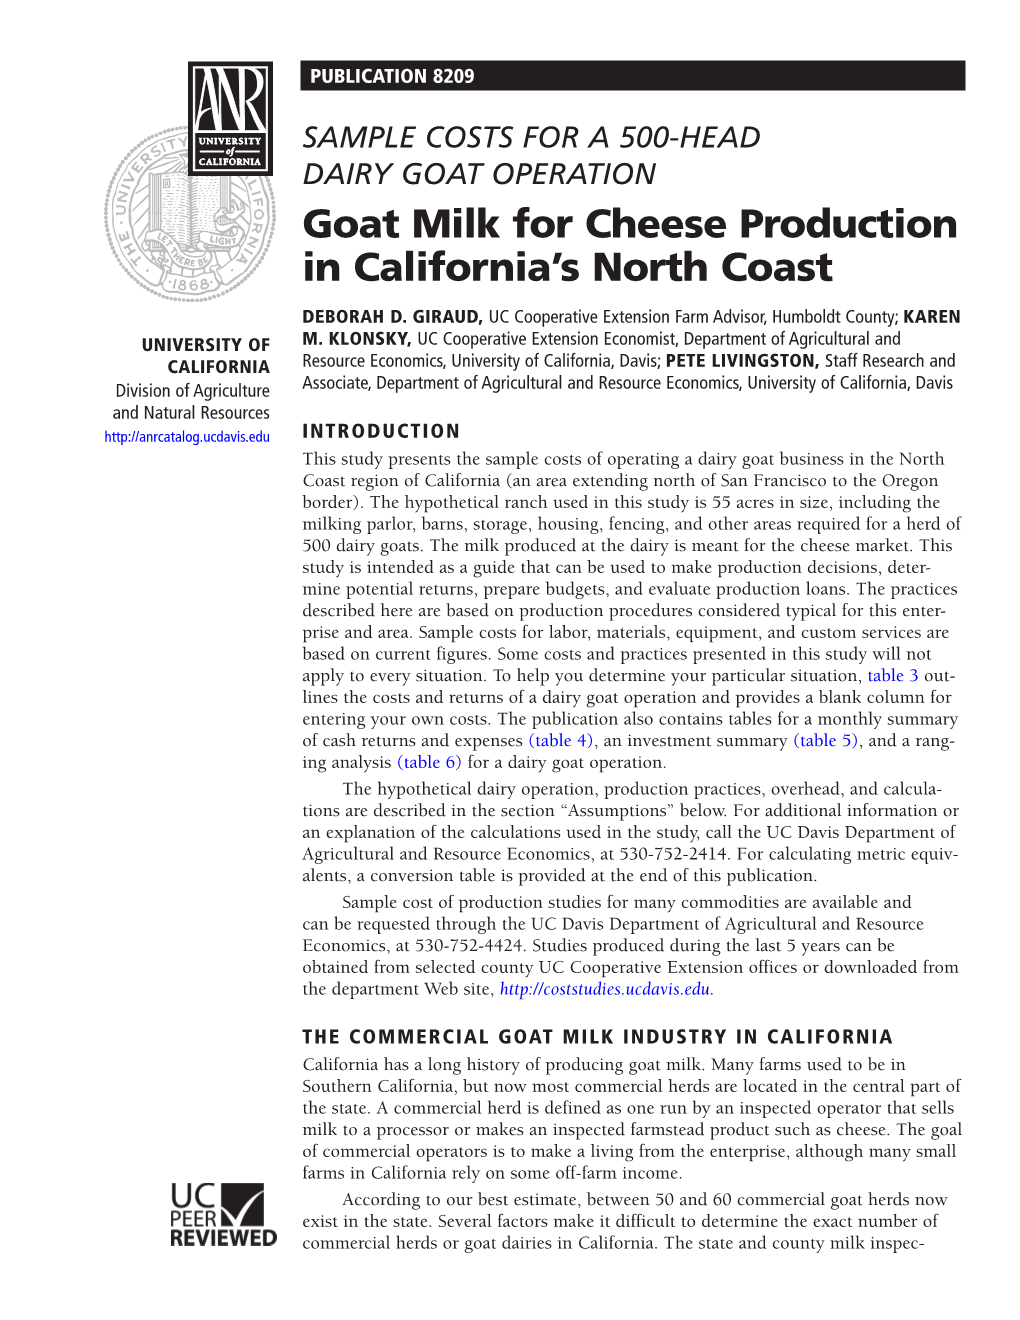 Goat Milk for Cheese Production in California's North Coast